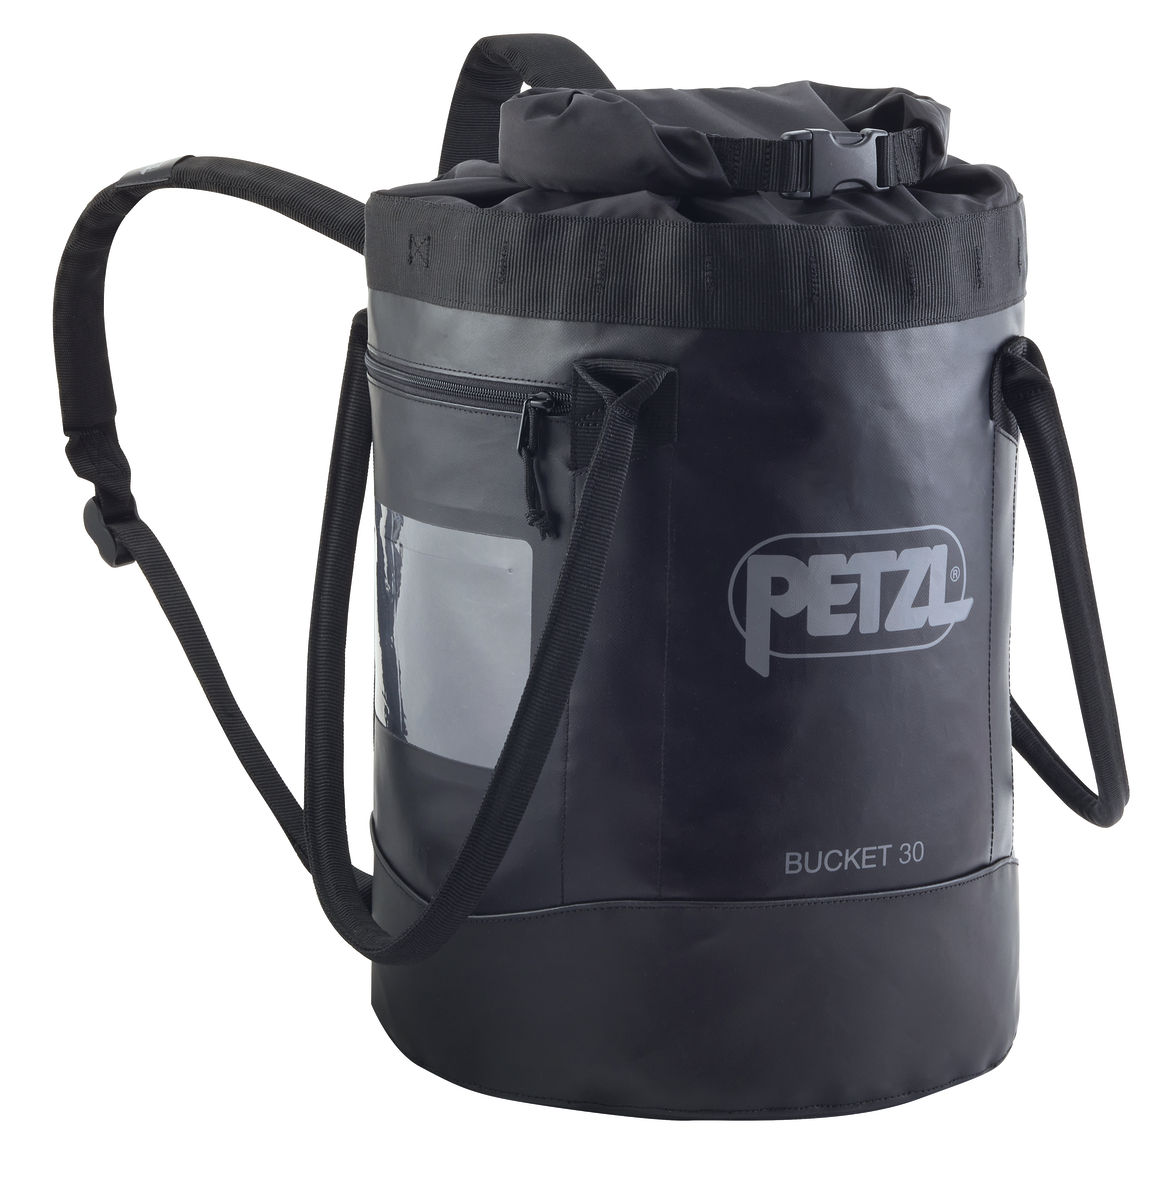 Petzl BUCKET 30 Rope Bag from Columbia Safety